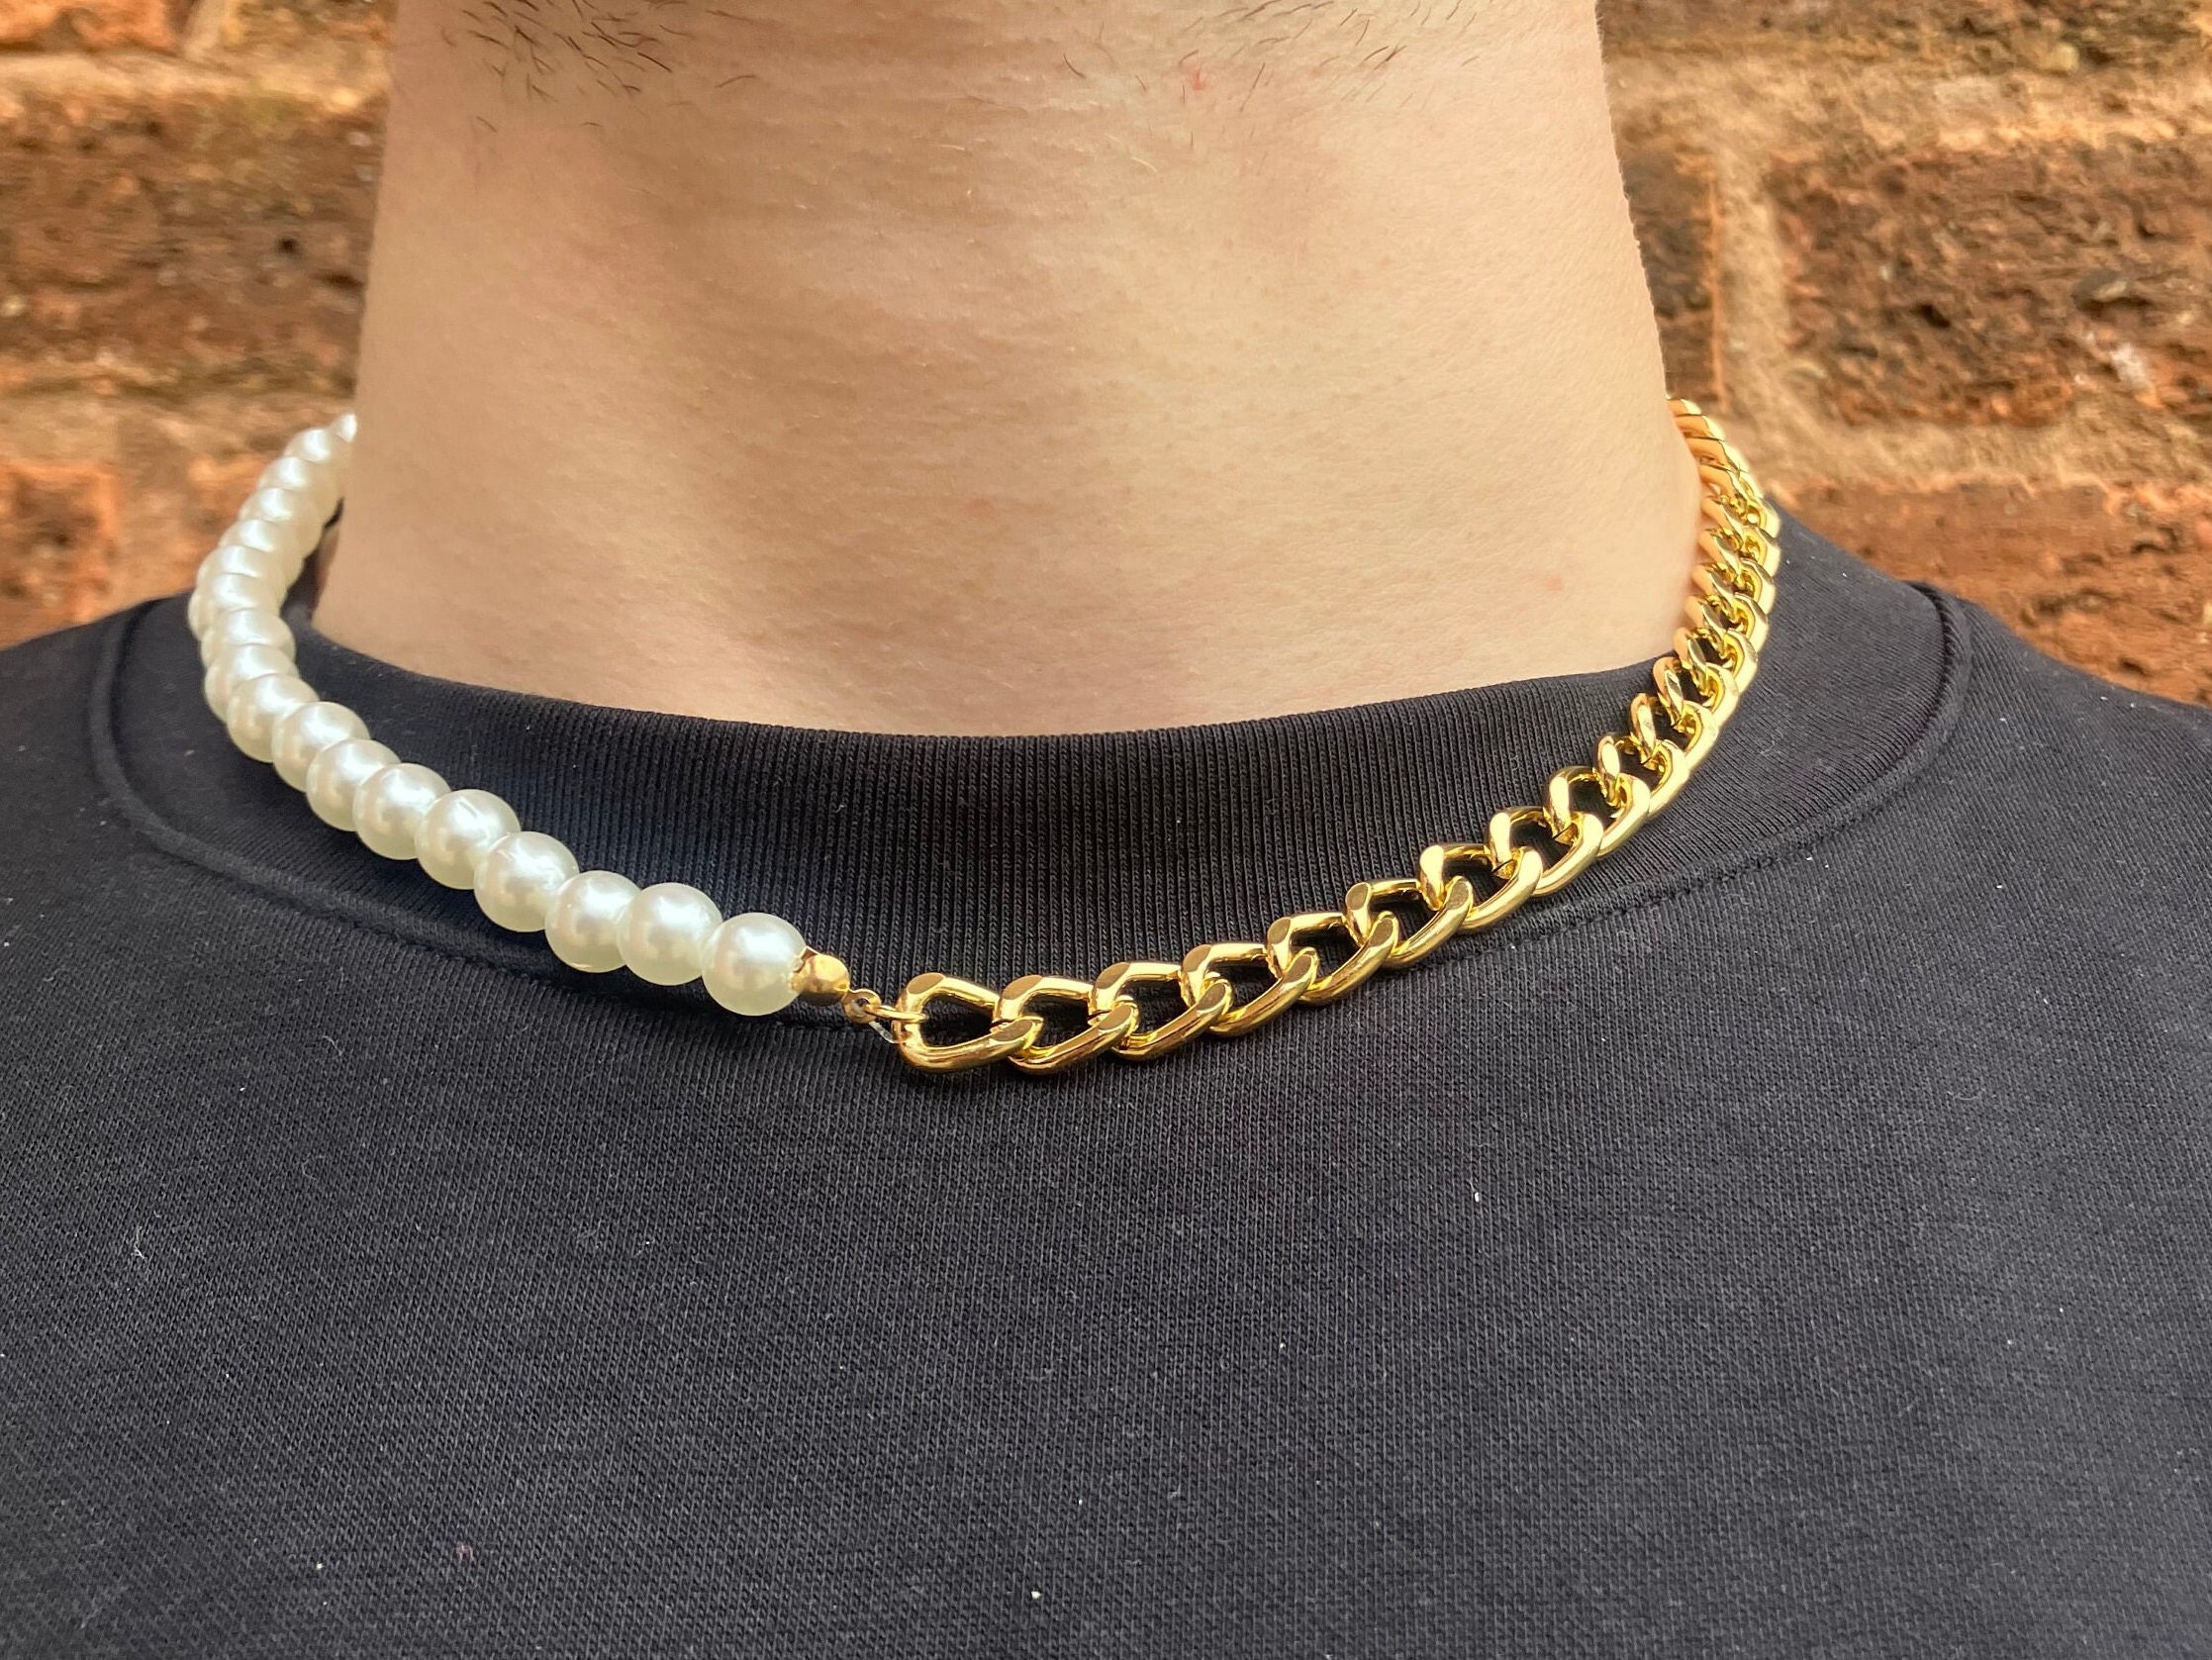 Chains Half Pearl Chain Necklace For Men Women Silver Gold Cuban Link  Stainless Steel Jewelry Choker Chunky Punk Vintage StoutChai2882976 From  Gkh9, $25.09 | DHgate.Com